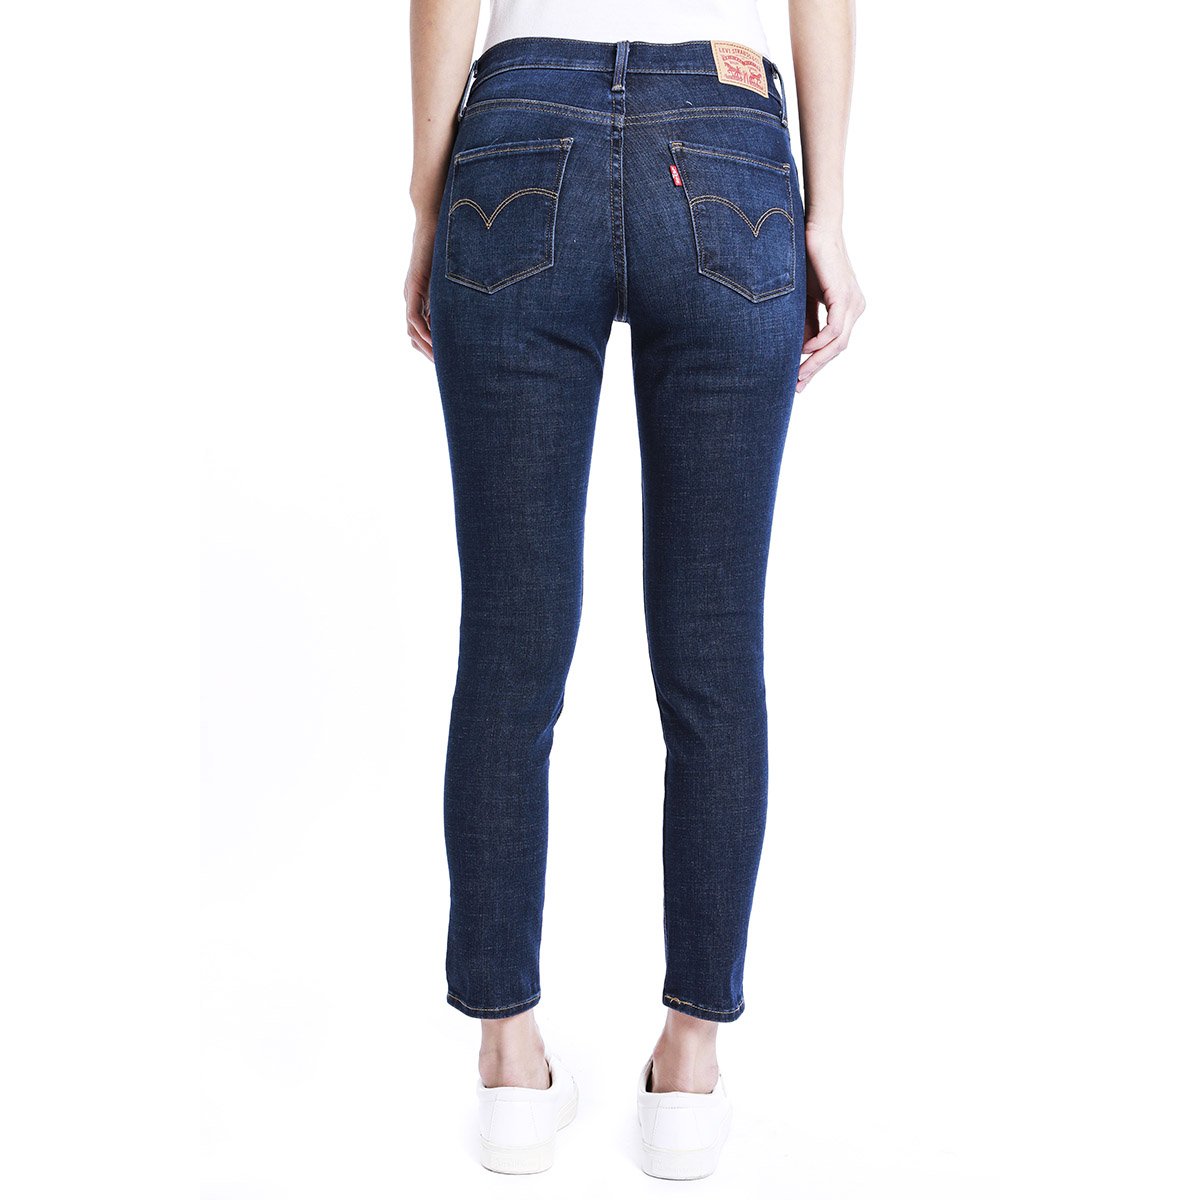 Jeans  311 Shaping Ankle Skinny  Levis para Dama